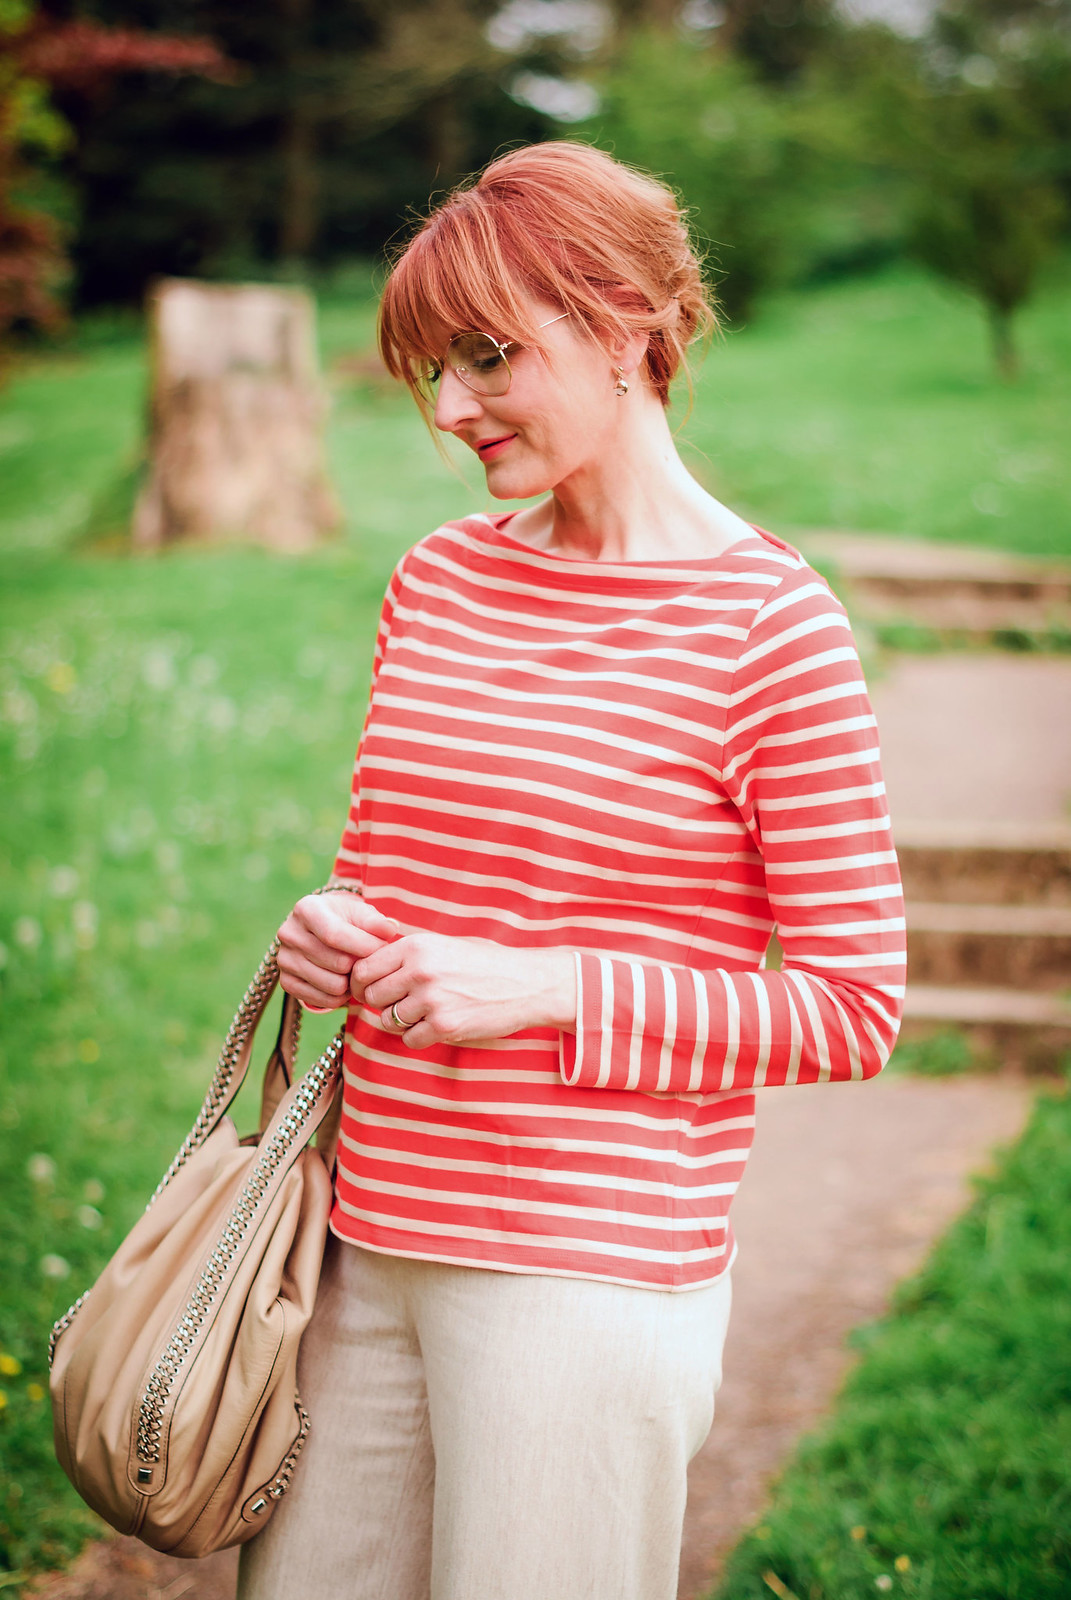 Loose, comfy summer style: Orange Breton stripe top wide leg cream trousers pink snakeskin shoes rose gold aviators | Not Dressed As Lamb, over 40 style